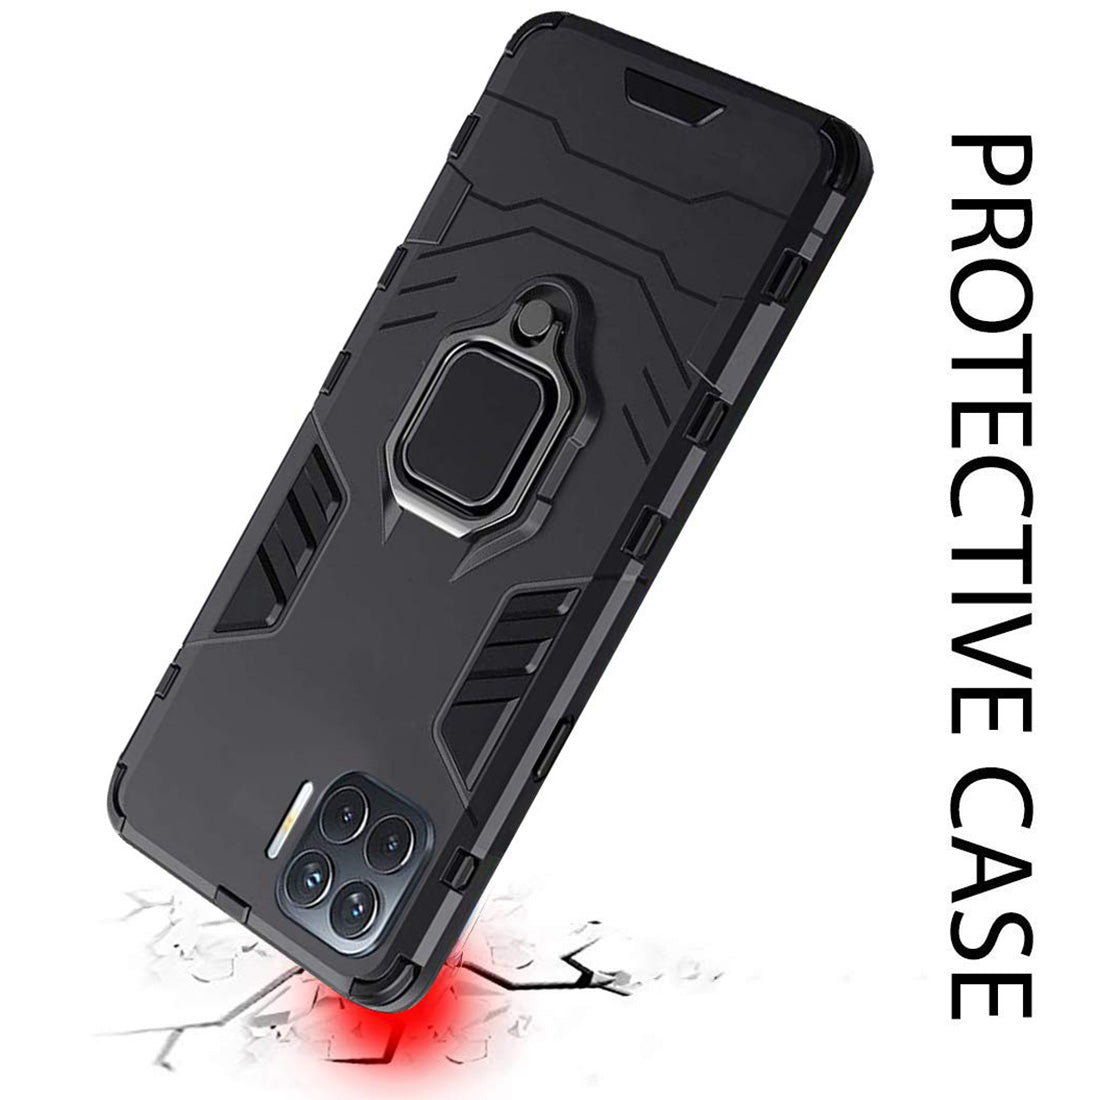 Hybrid Rugged Armor Kickstand Case for Oppo F17 Pro 4G / Oppo A93 4G